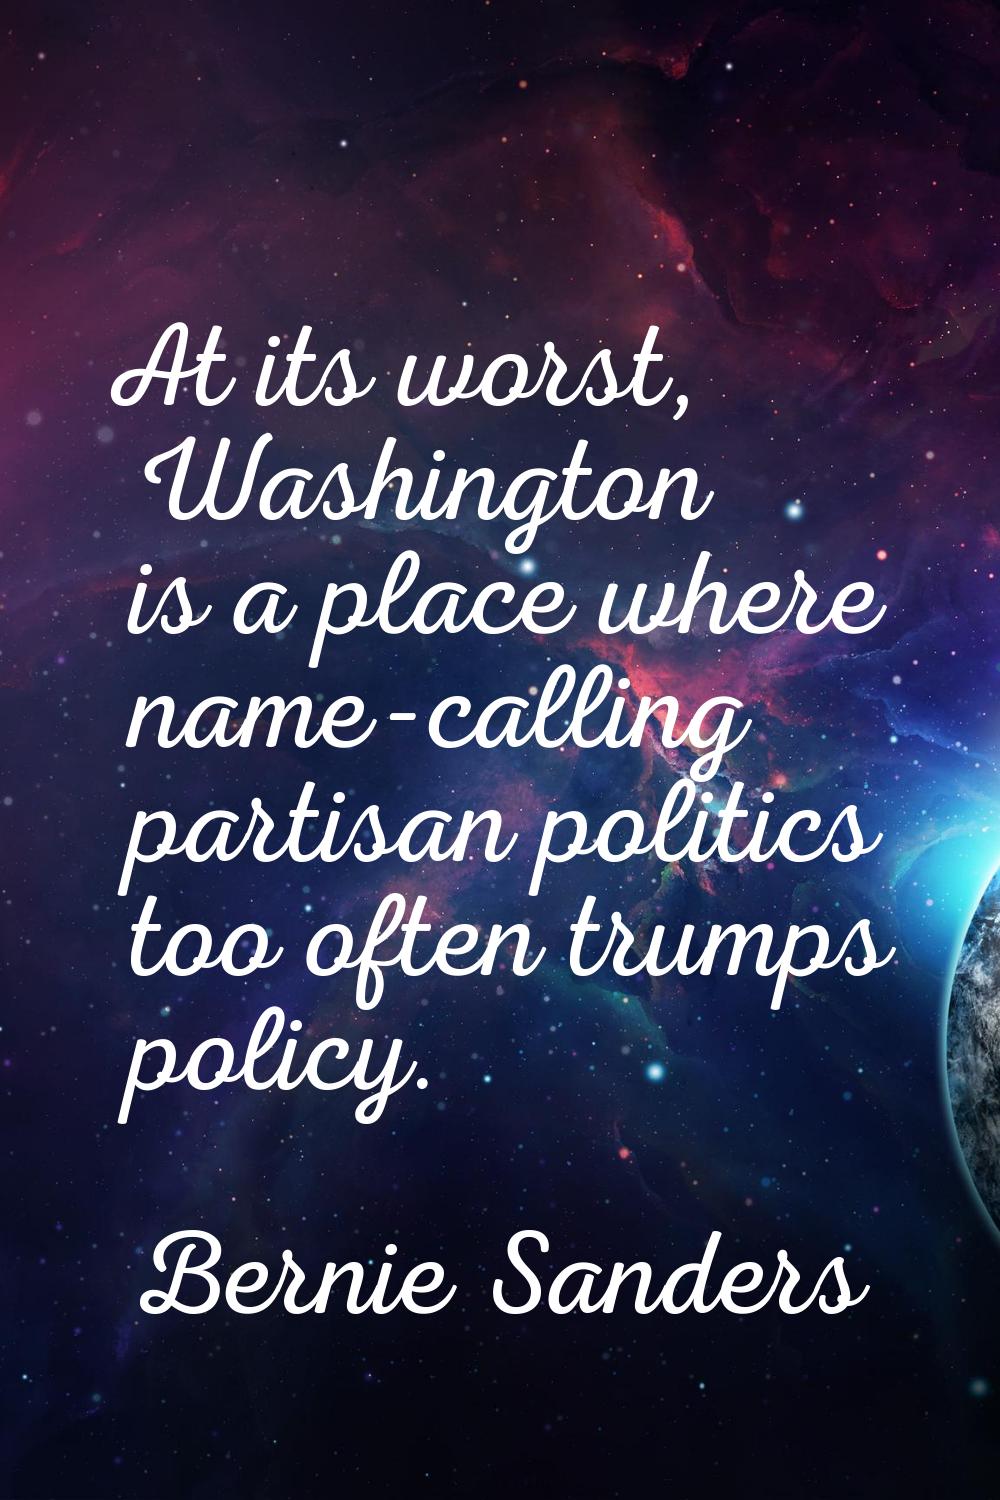 At its worst, Washington is a place where name-calling partisan politics too often trumps policy.